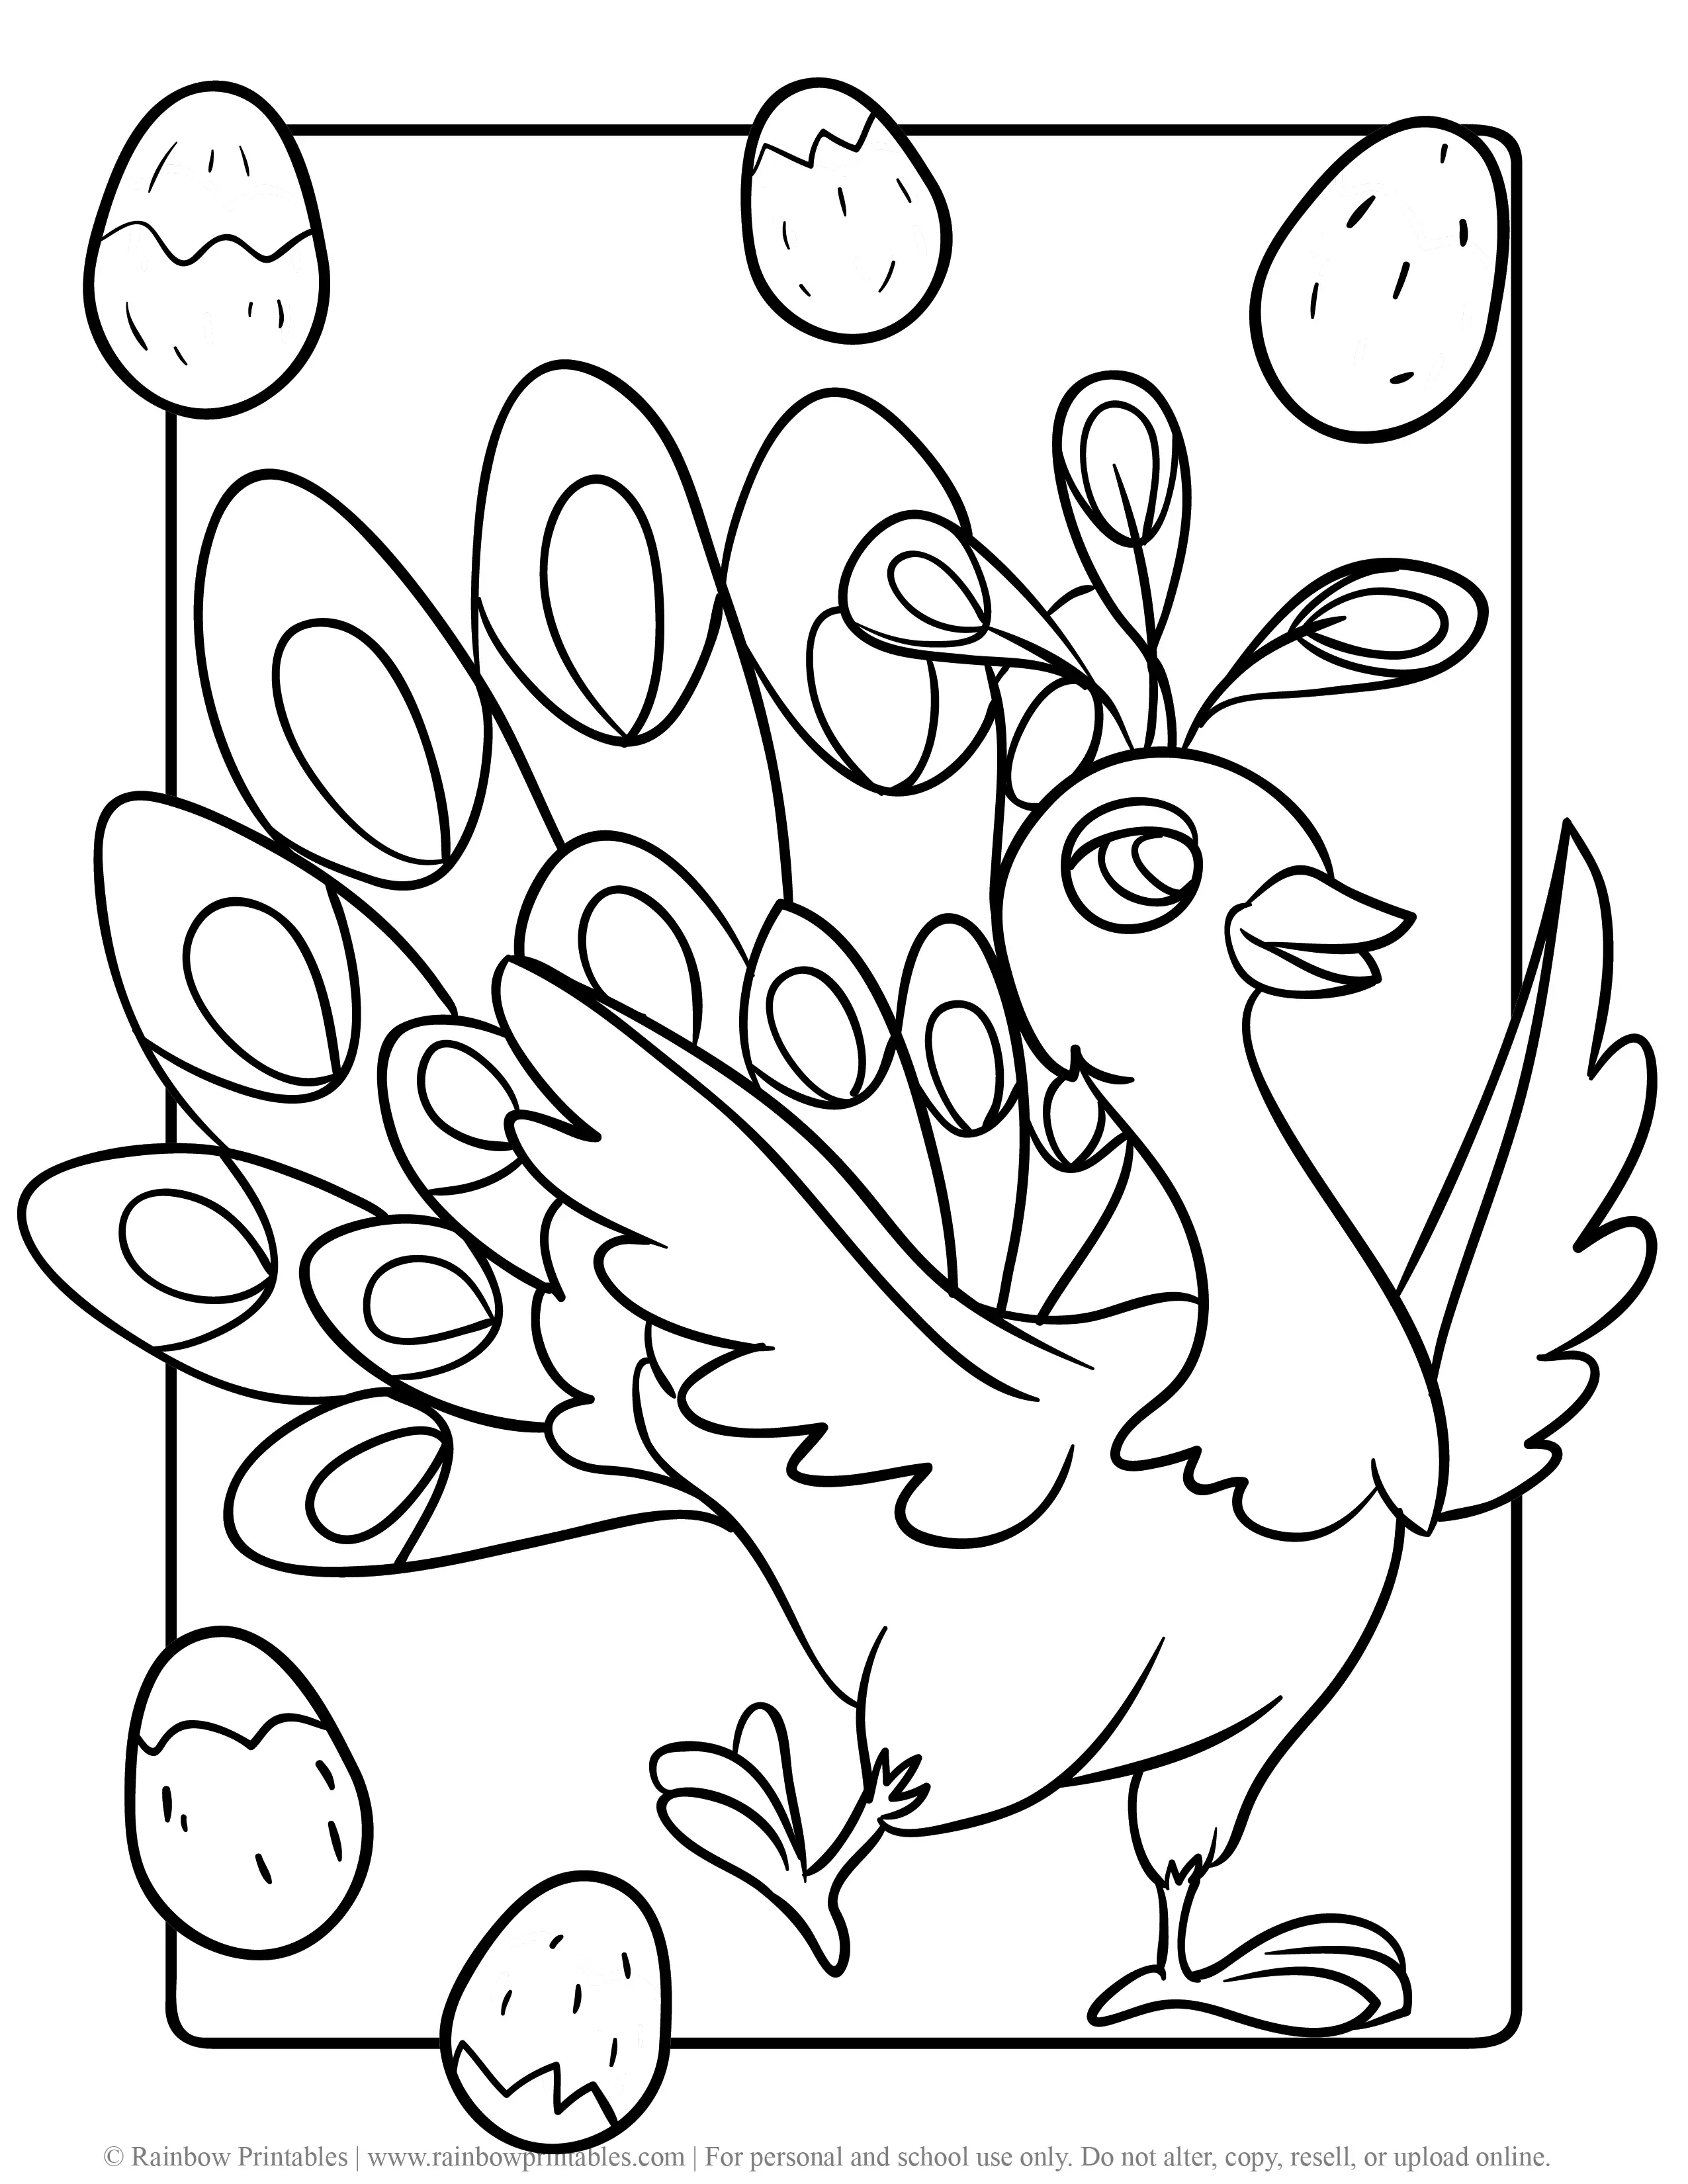 Free Coloring Pages for Kids Drawing Activities Line Art Illustration EGG PEACOCK BEAUTIFUL FEATHERS CARTOON